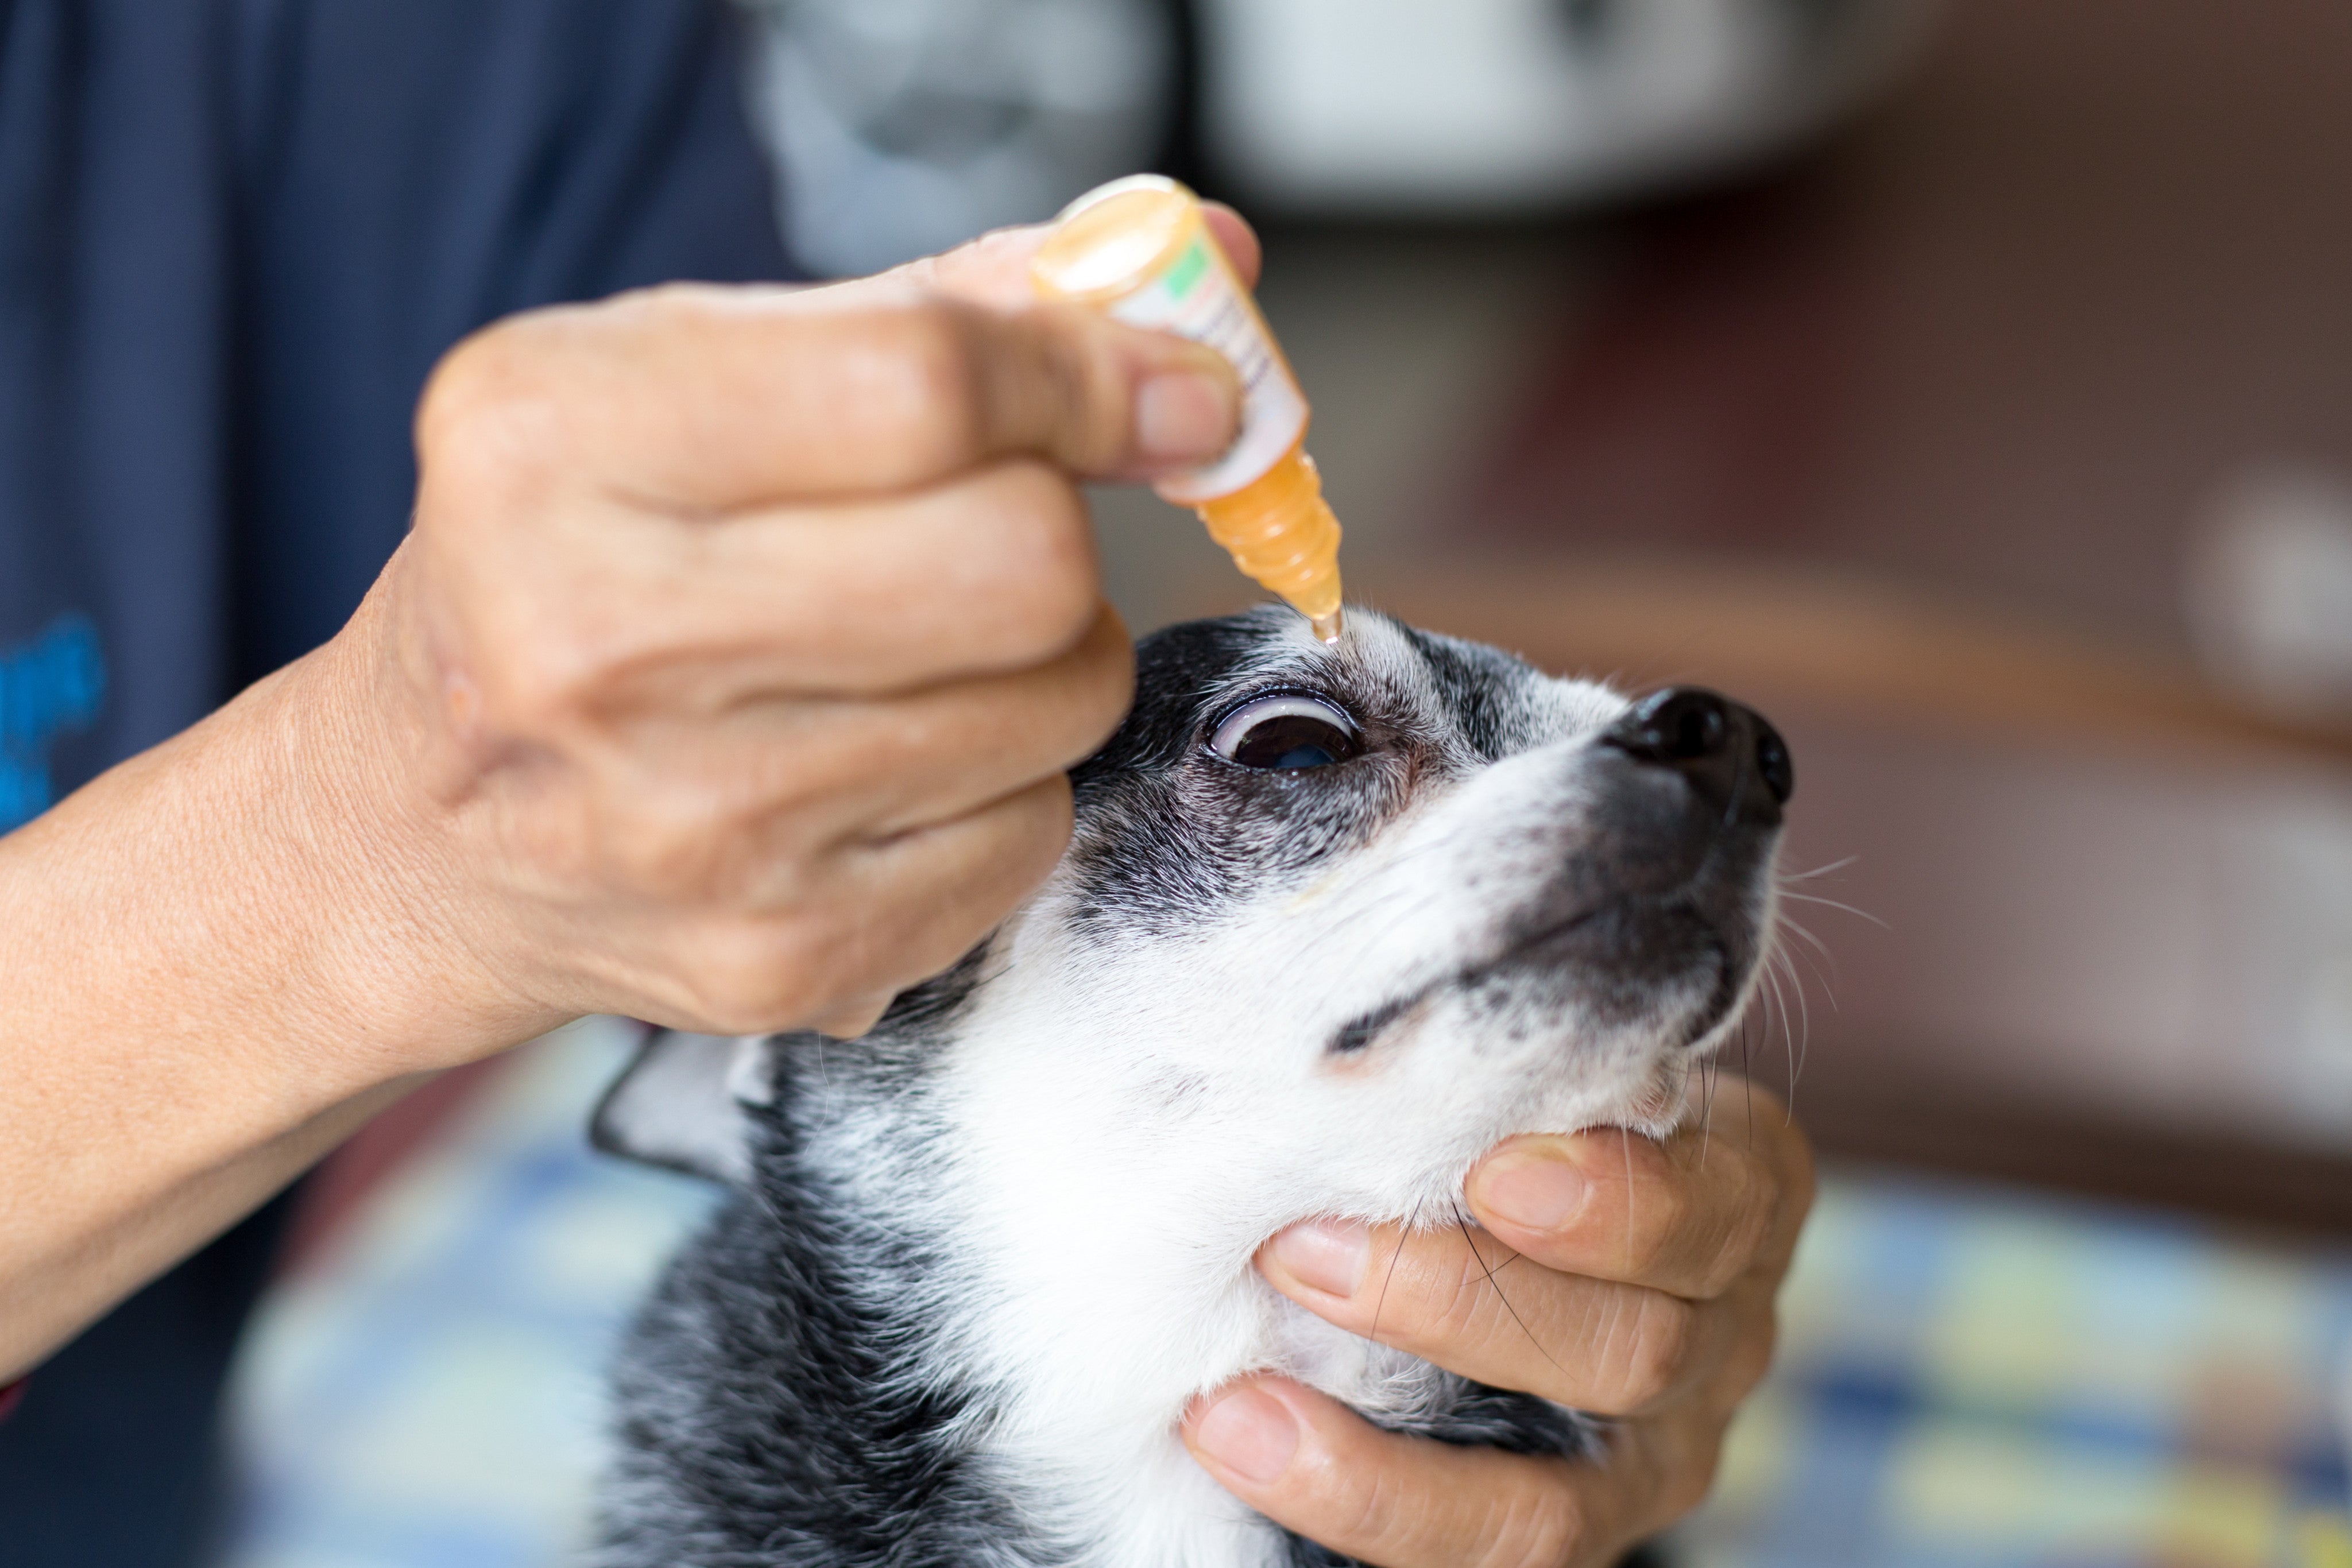 Using eyedrops to help treat dog eye conditions